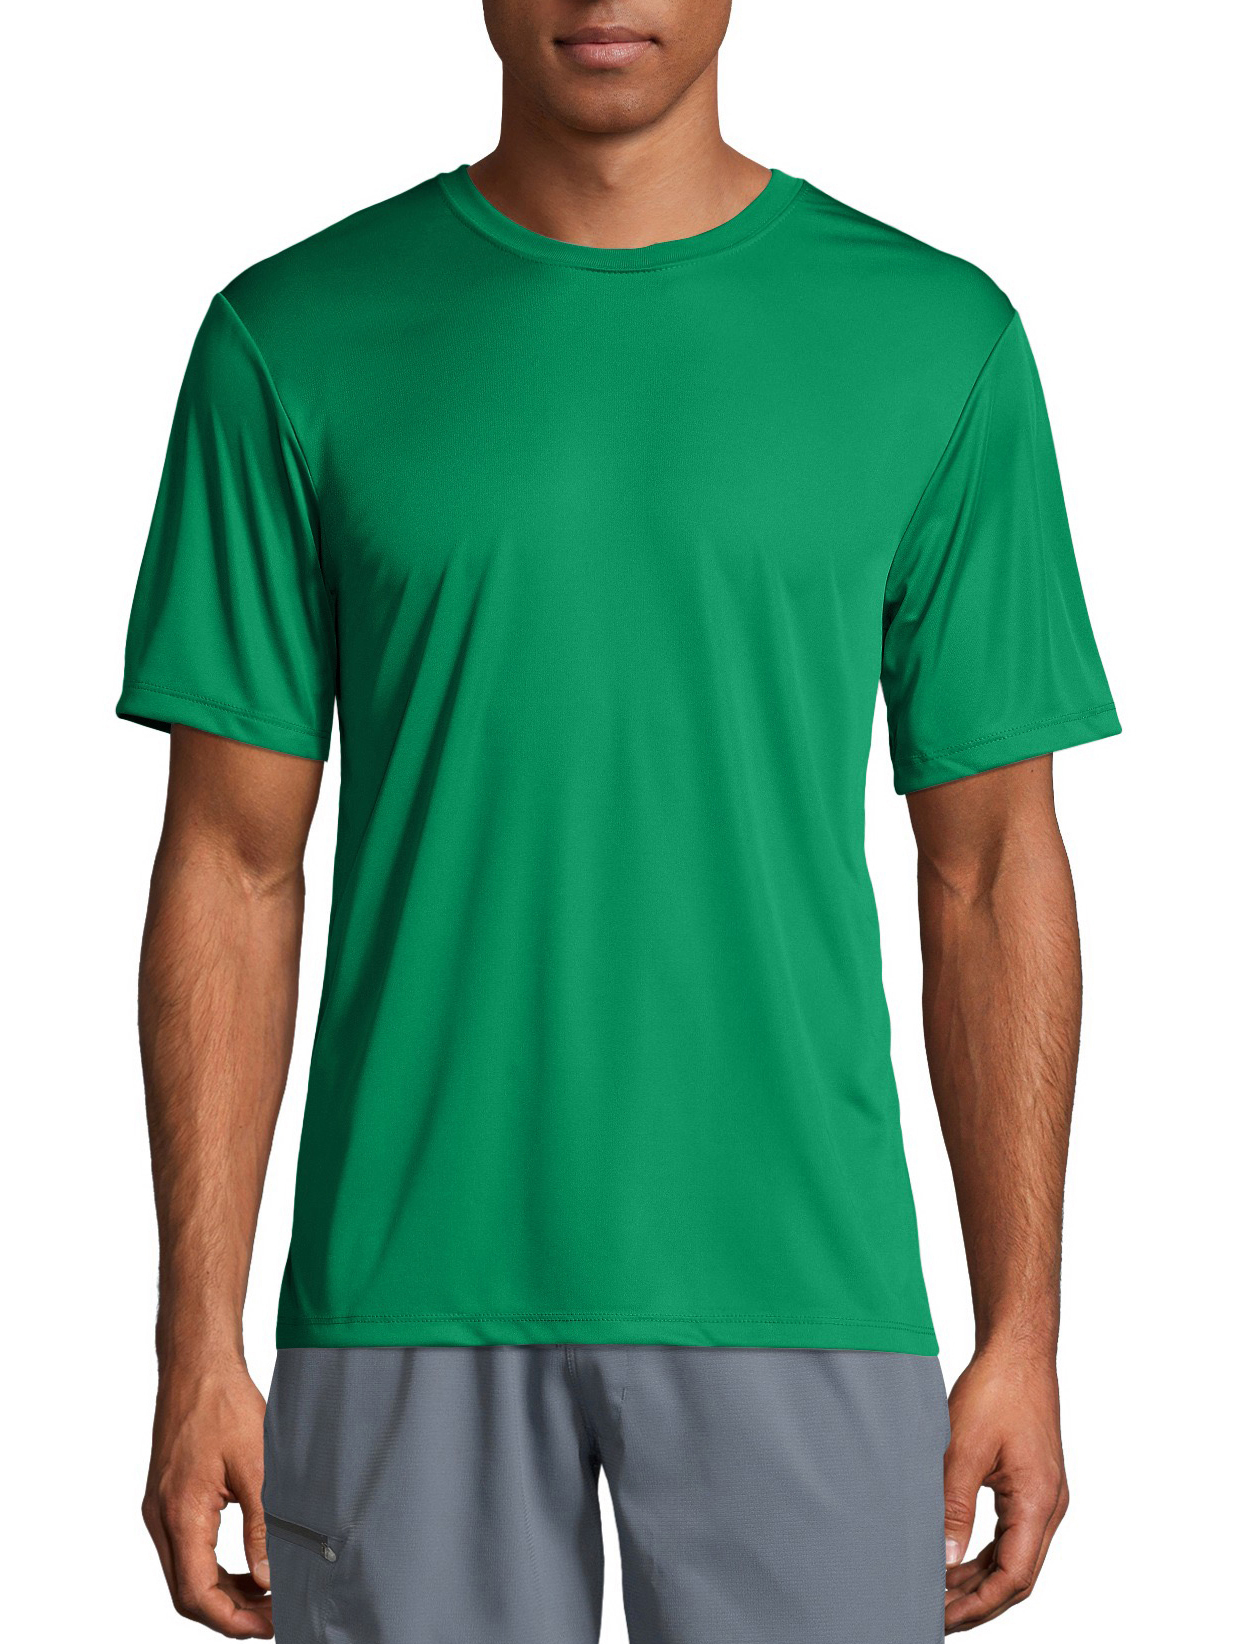 Hanes Sport Men's and Big Men's Short Sleeve Cool Dri Performance Tee (40+ UPF), Up to Size 3XL - image 1 of 6